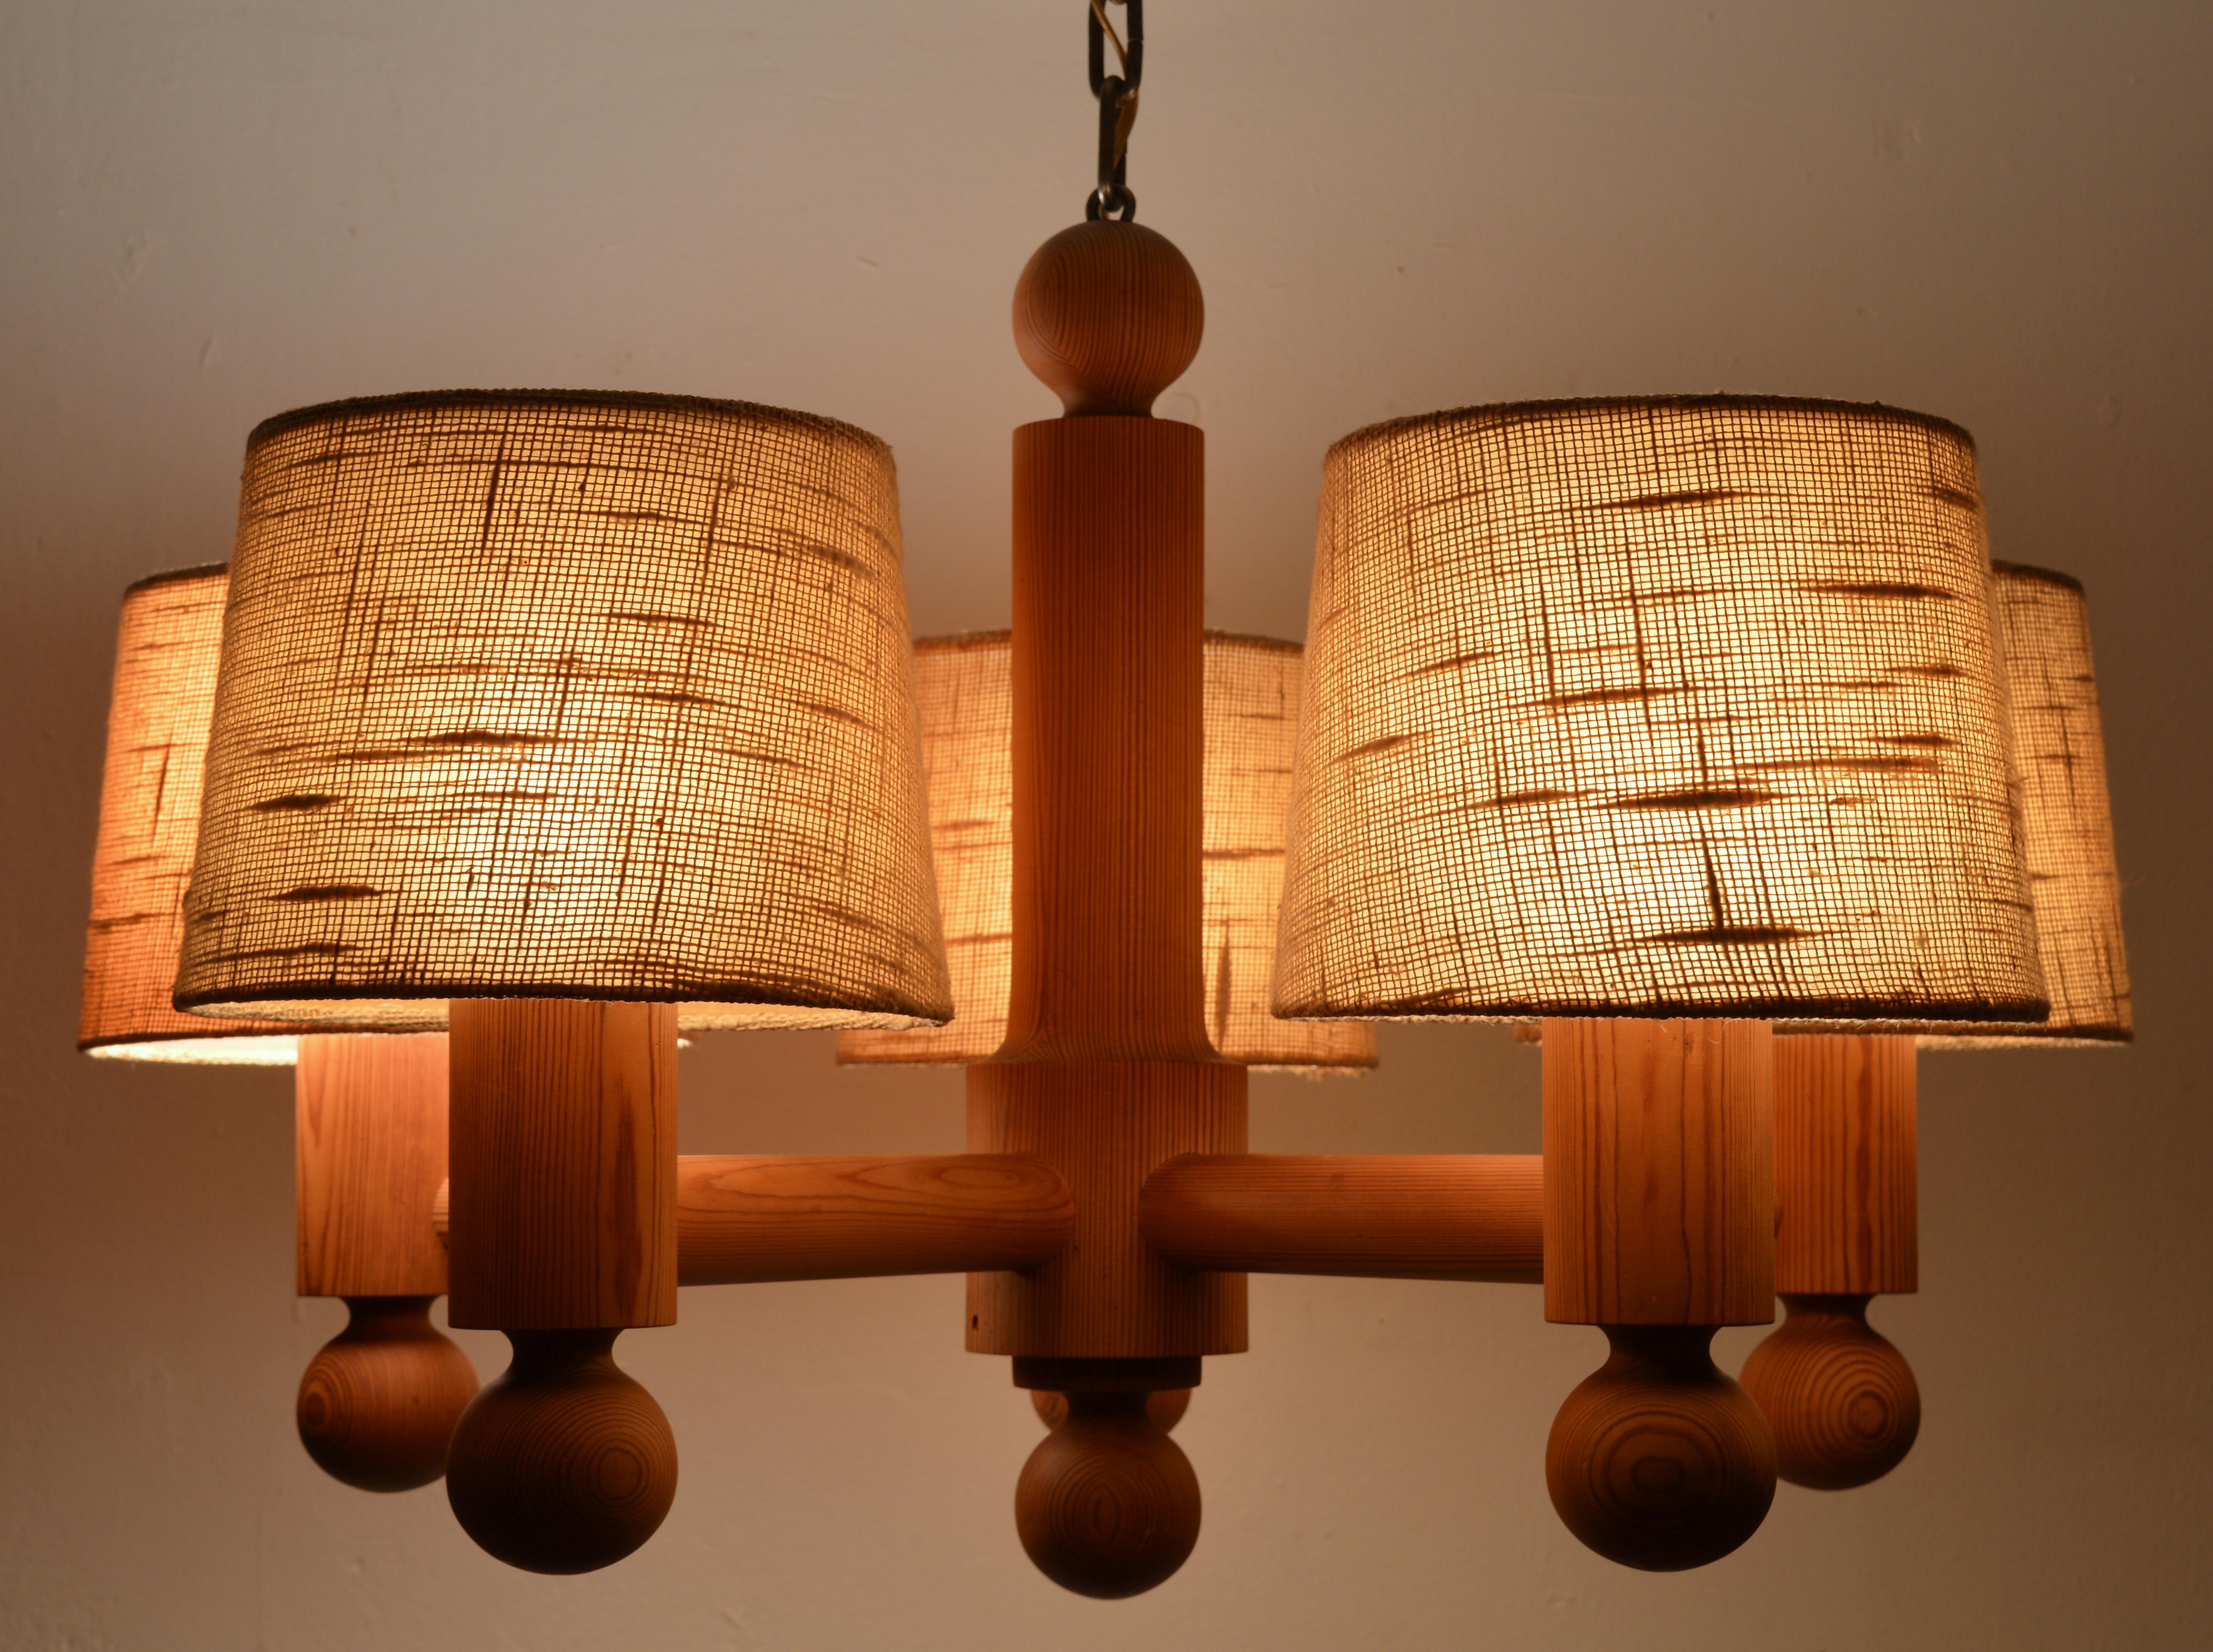 ‎‎Swedish lighting manufacturer, Luxus gave form to some of the now iconic models that define the “Swedish mid-century style”. This solid pine wood, five-light chandelier was created in this “golden age of Scandinavian design”, a period that saw the